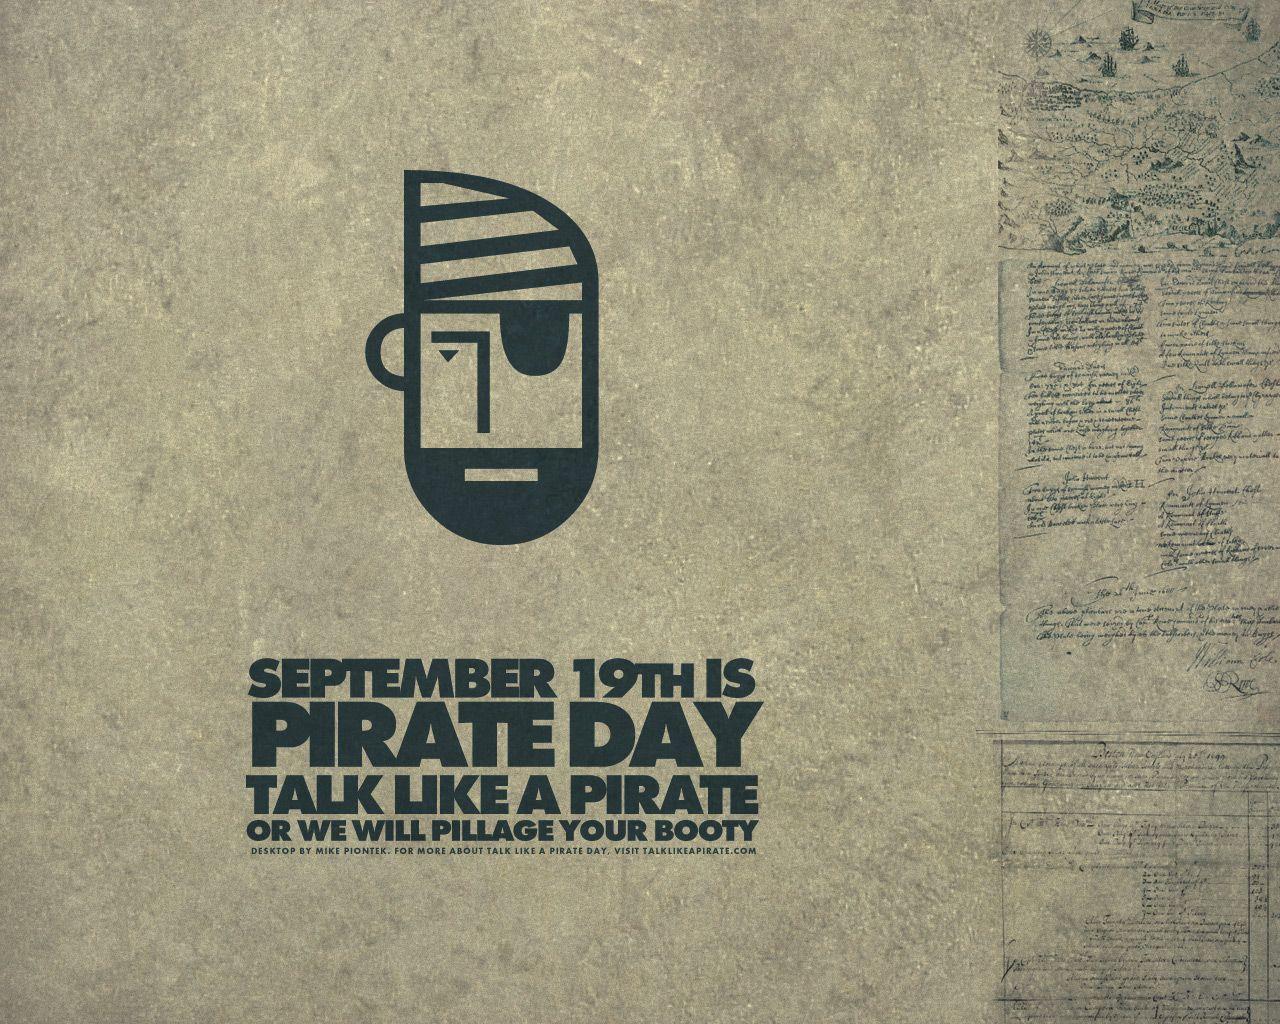 You can talk to you like. Talk like a Pirate Day. Talk like a Pirate Day фото. Толк лайк. September 19th: International talk like a Pirate Day.